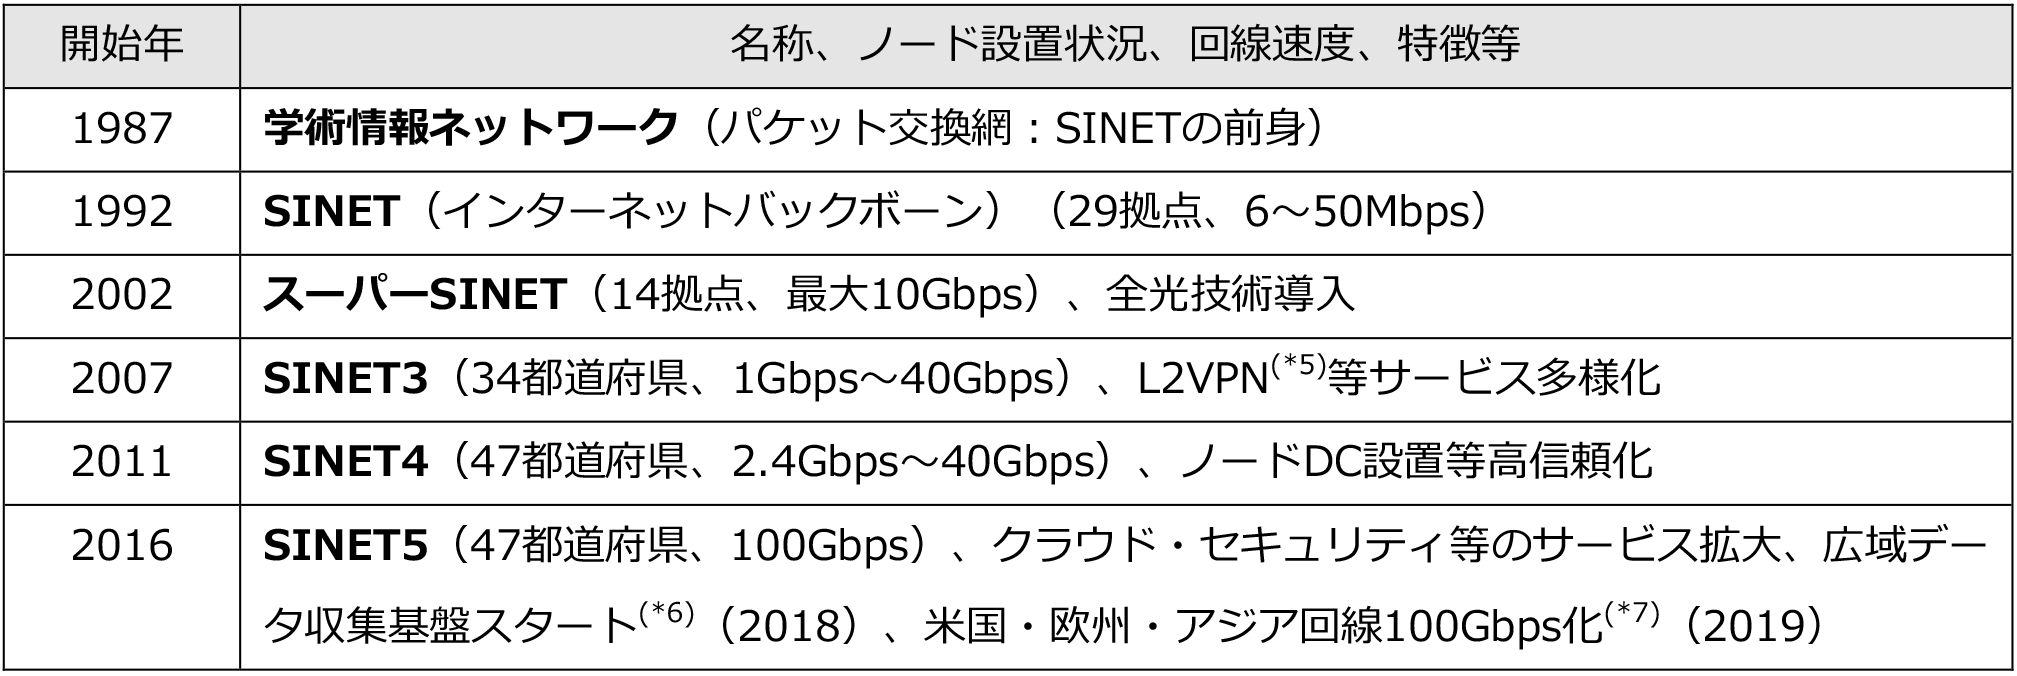 nii_newsrelease_20190313_table2.png